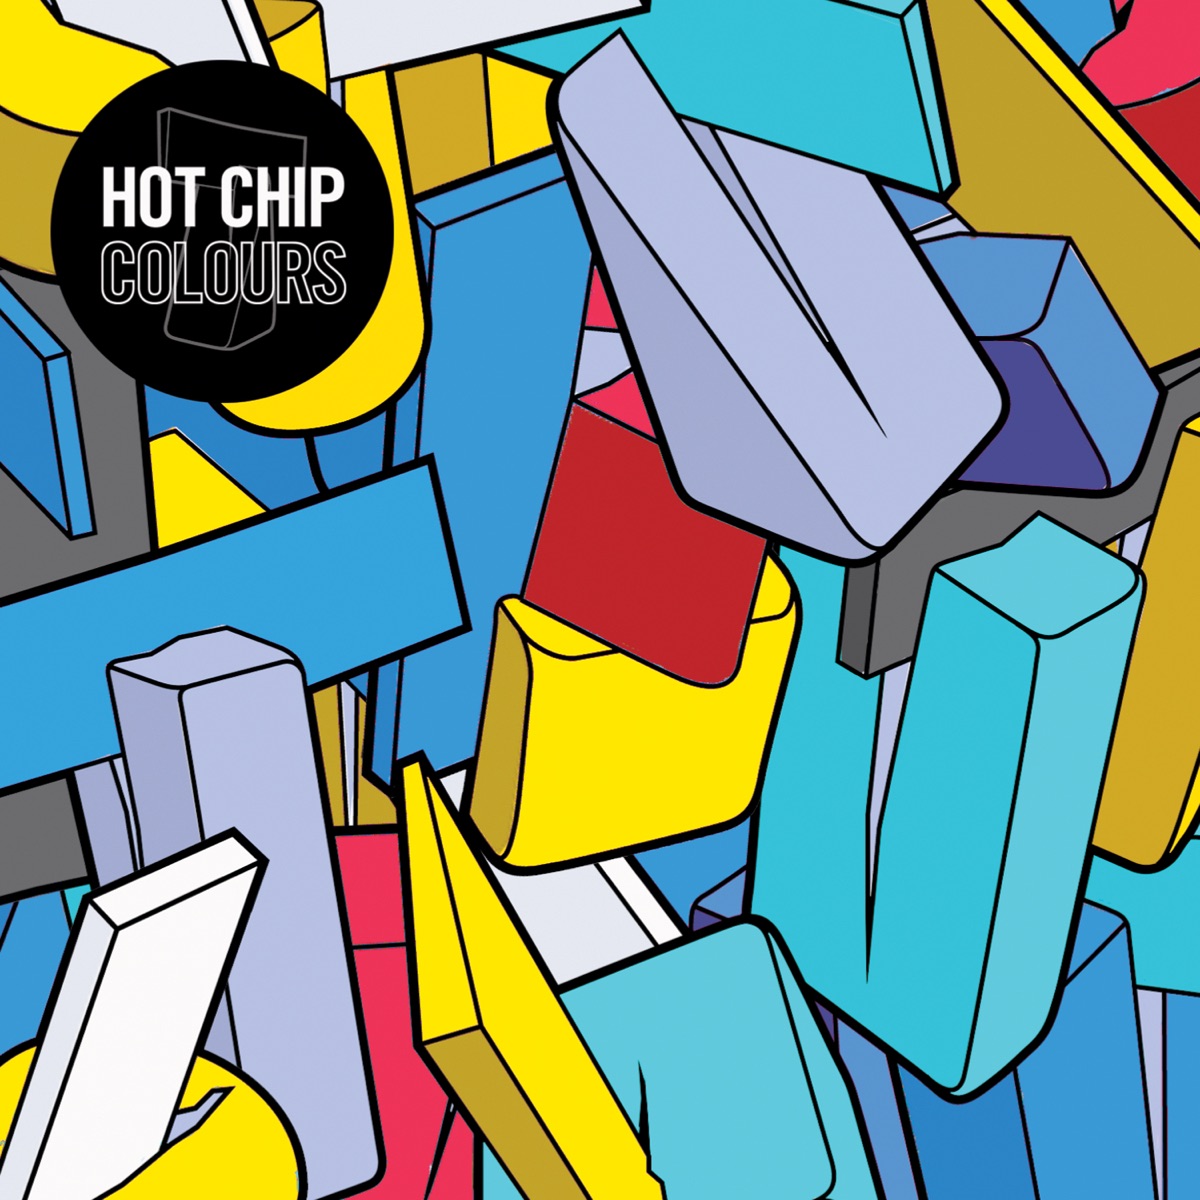 hot chip cover